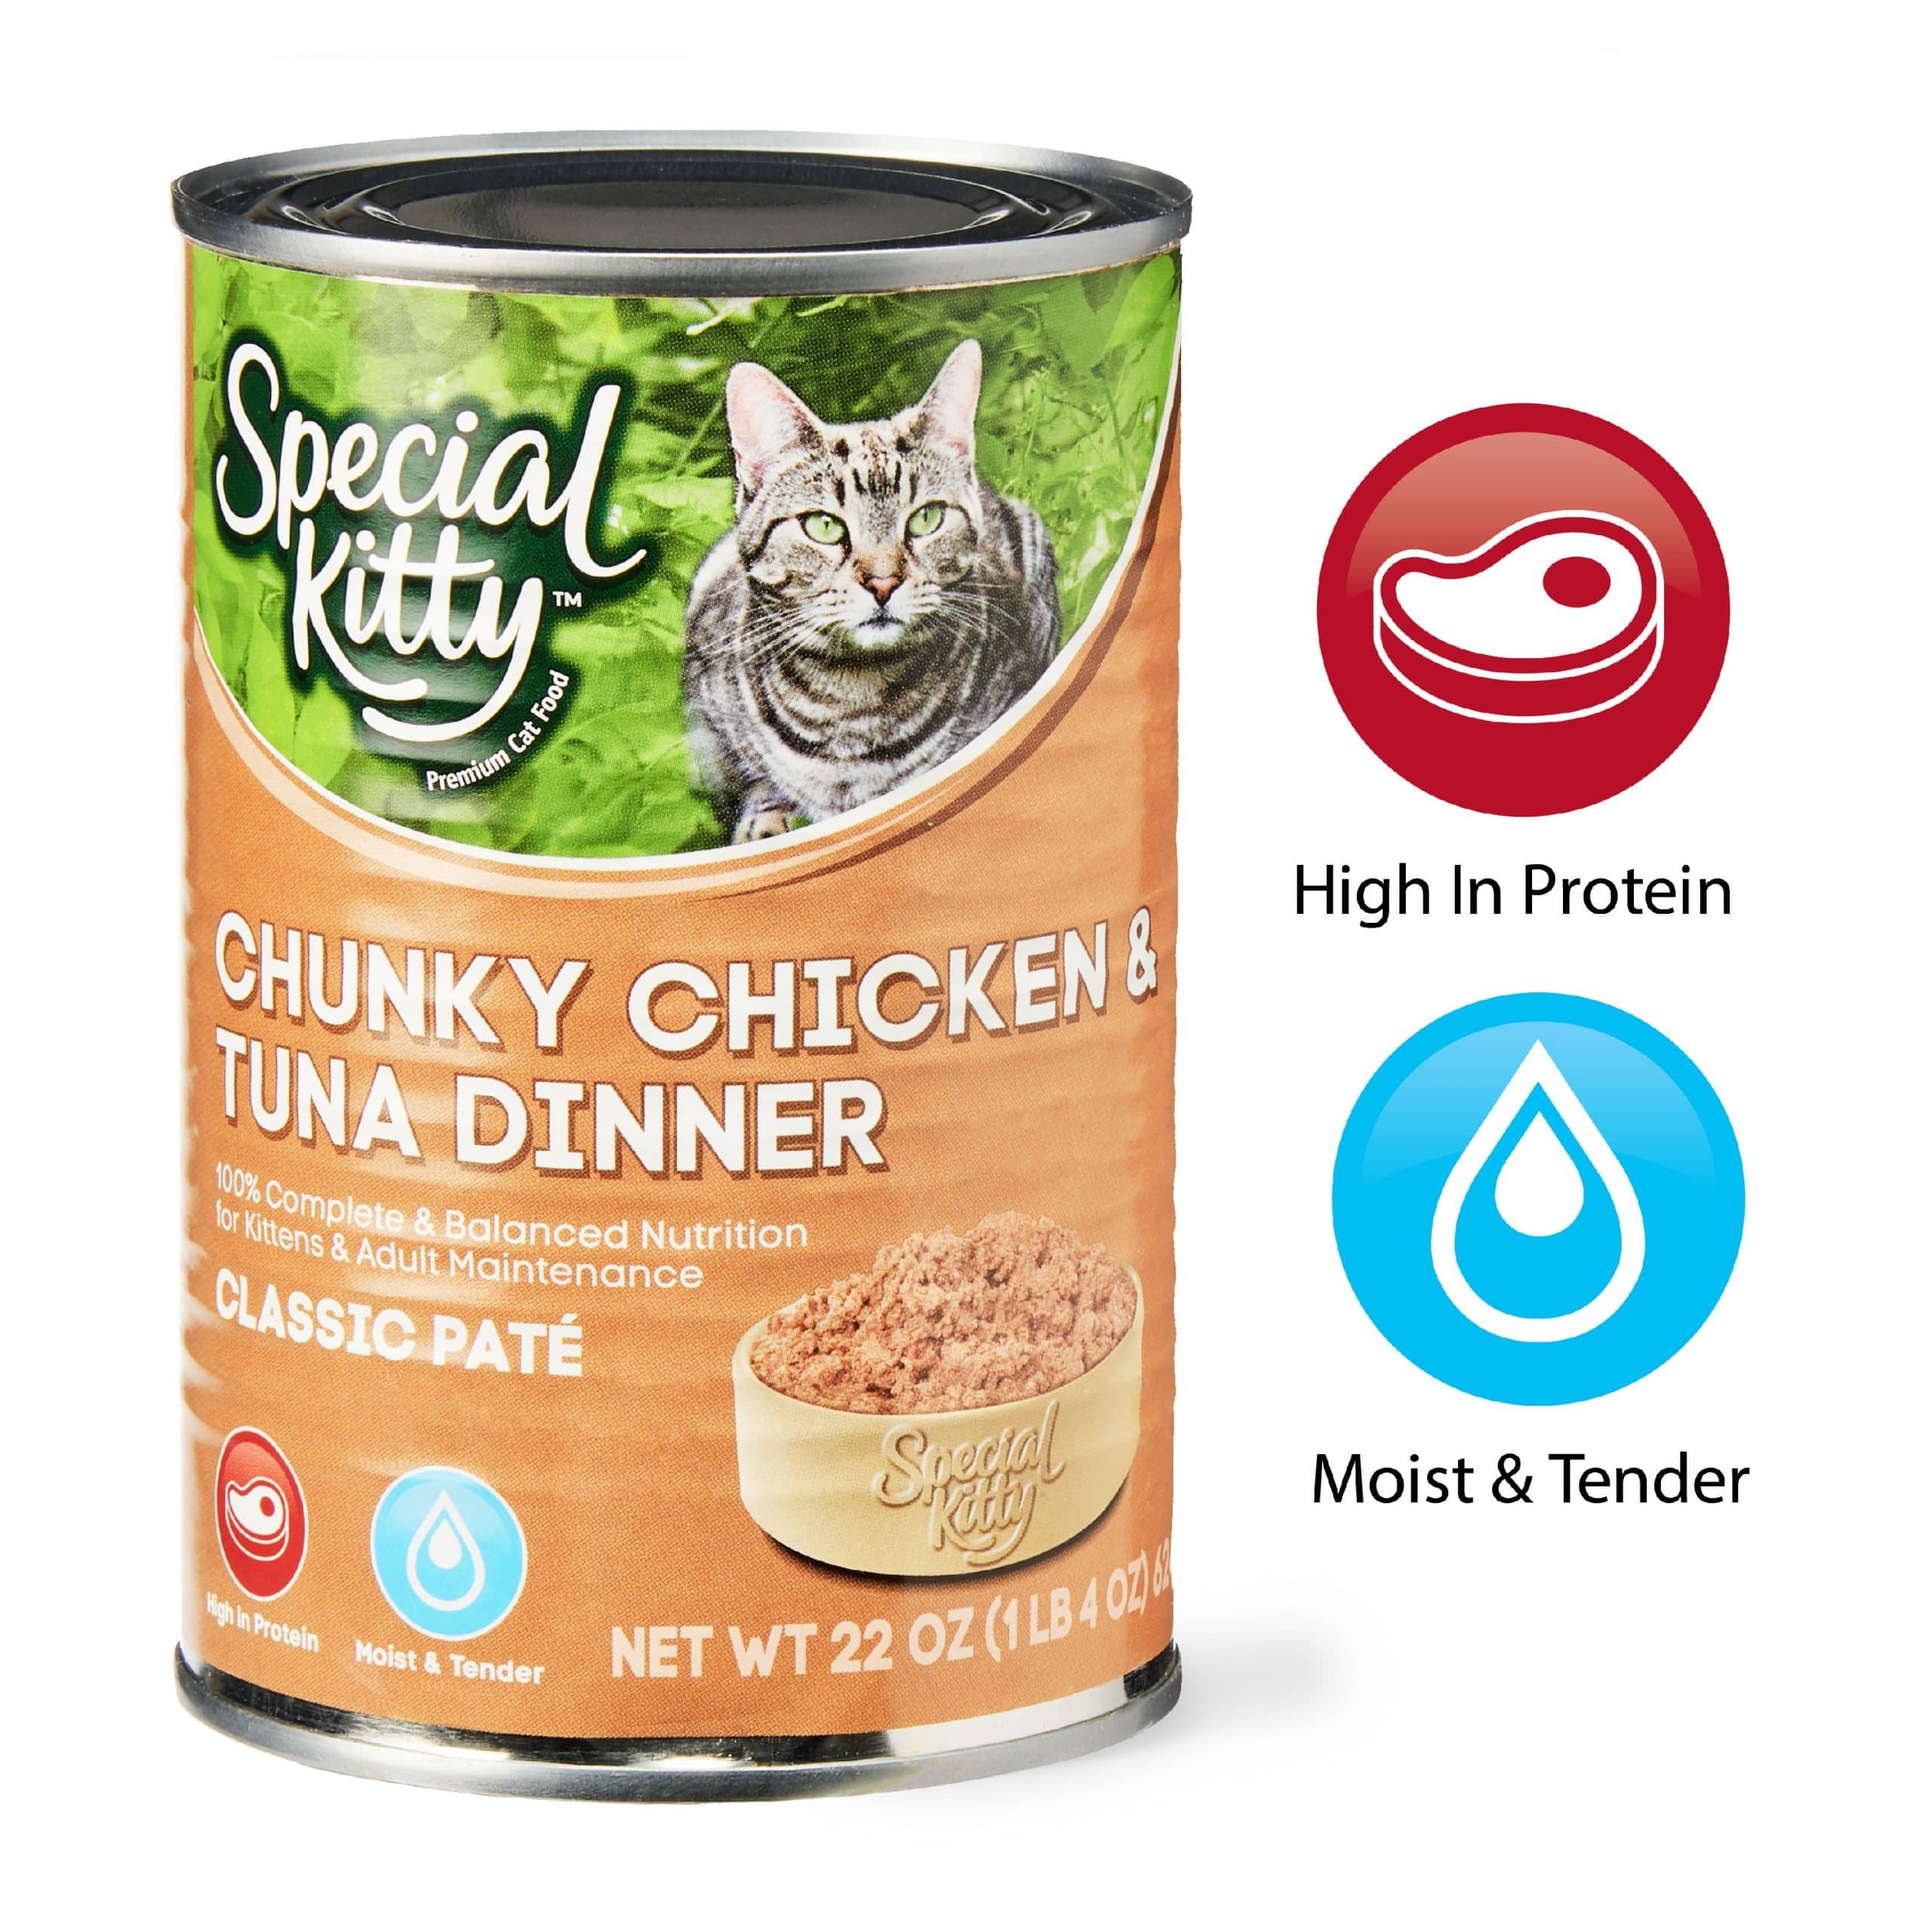 Special Kitty Canned Cat Food 22 Oz